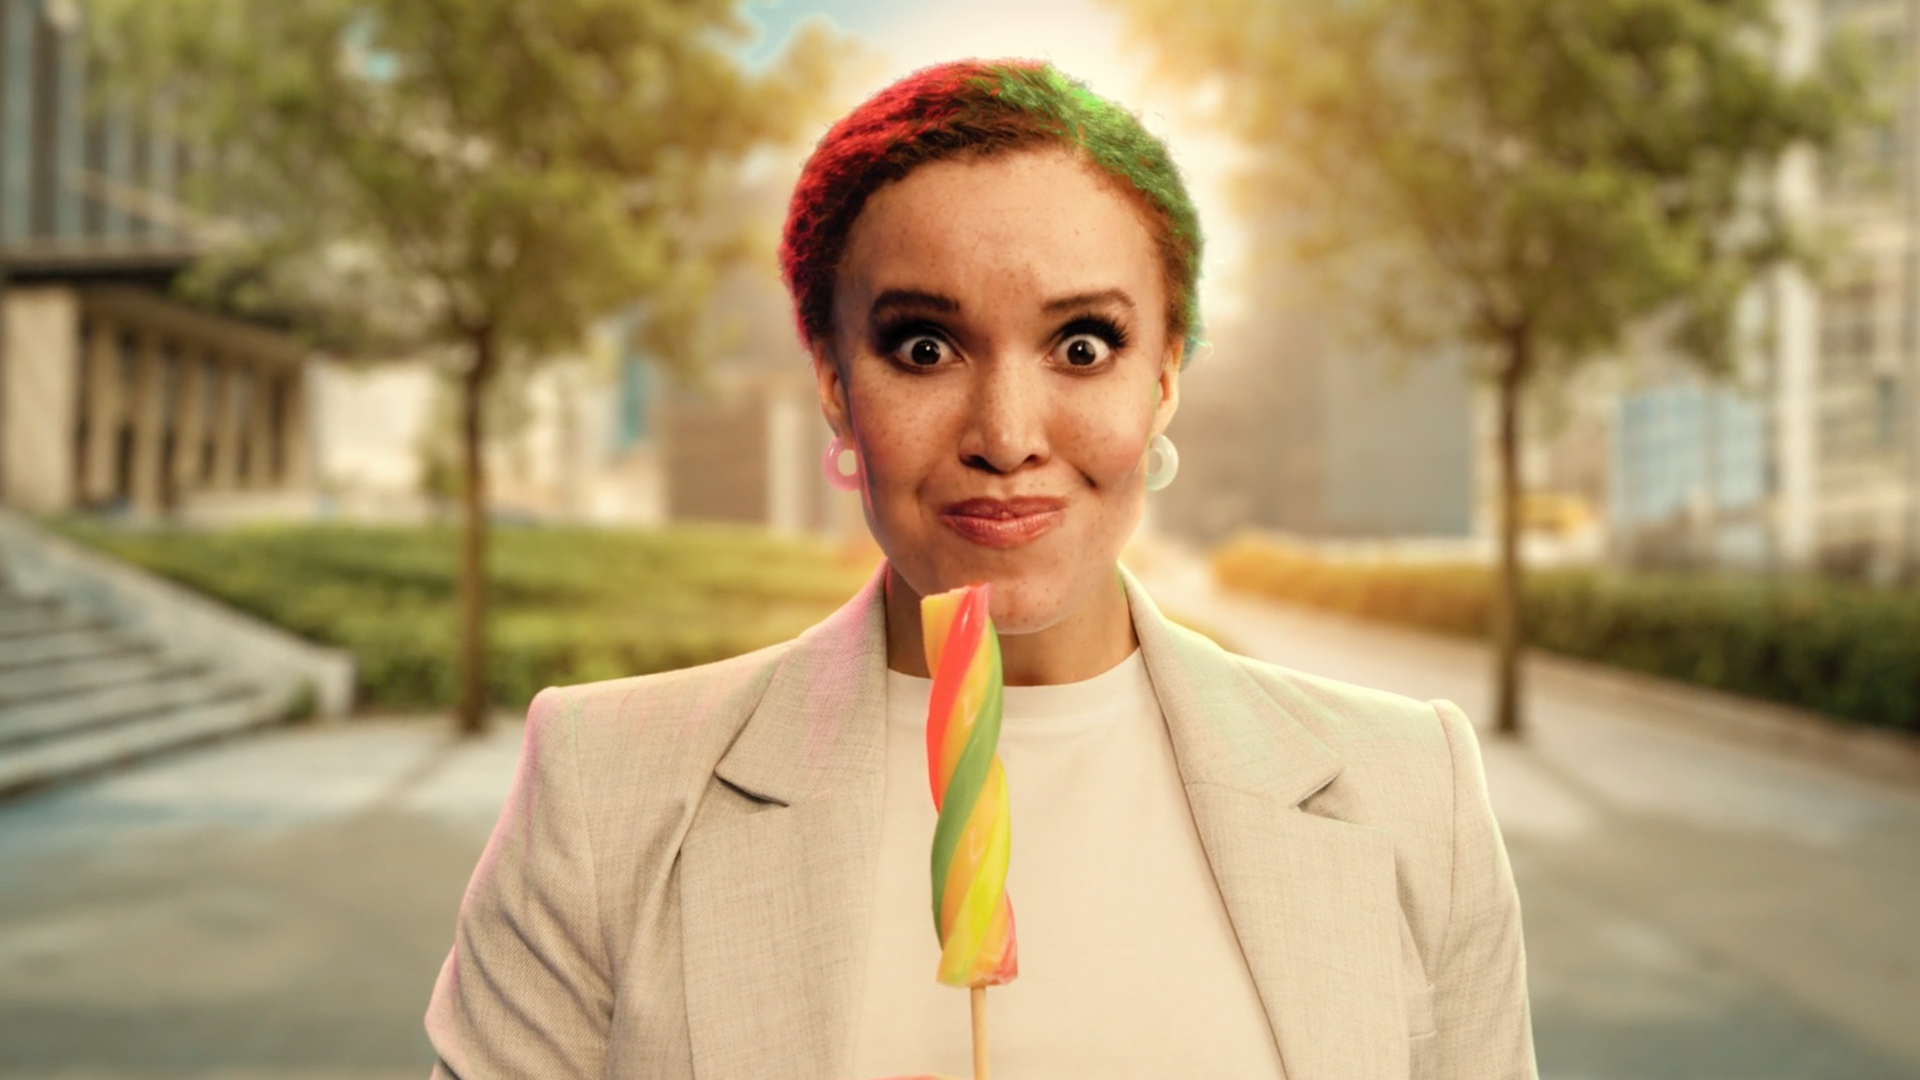 A woman is holding a colorful lollipop in her mouth.